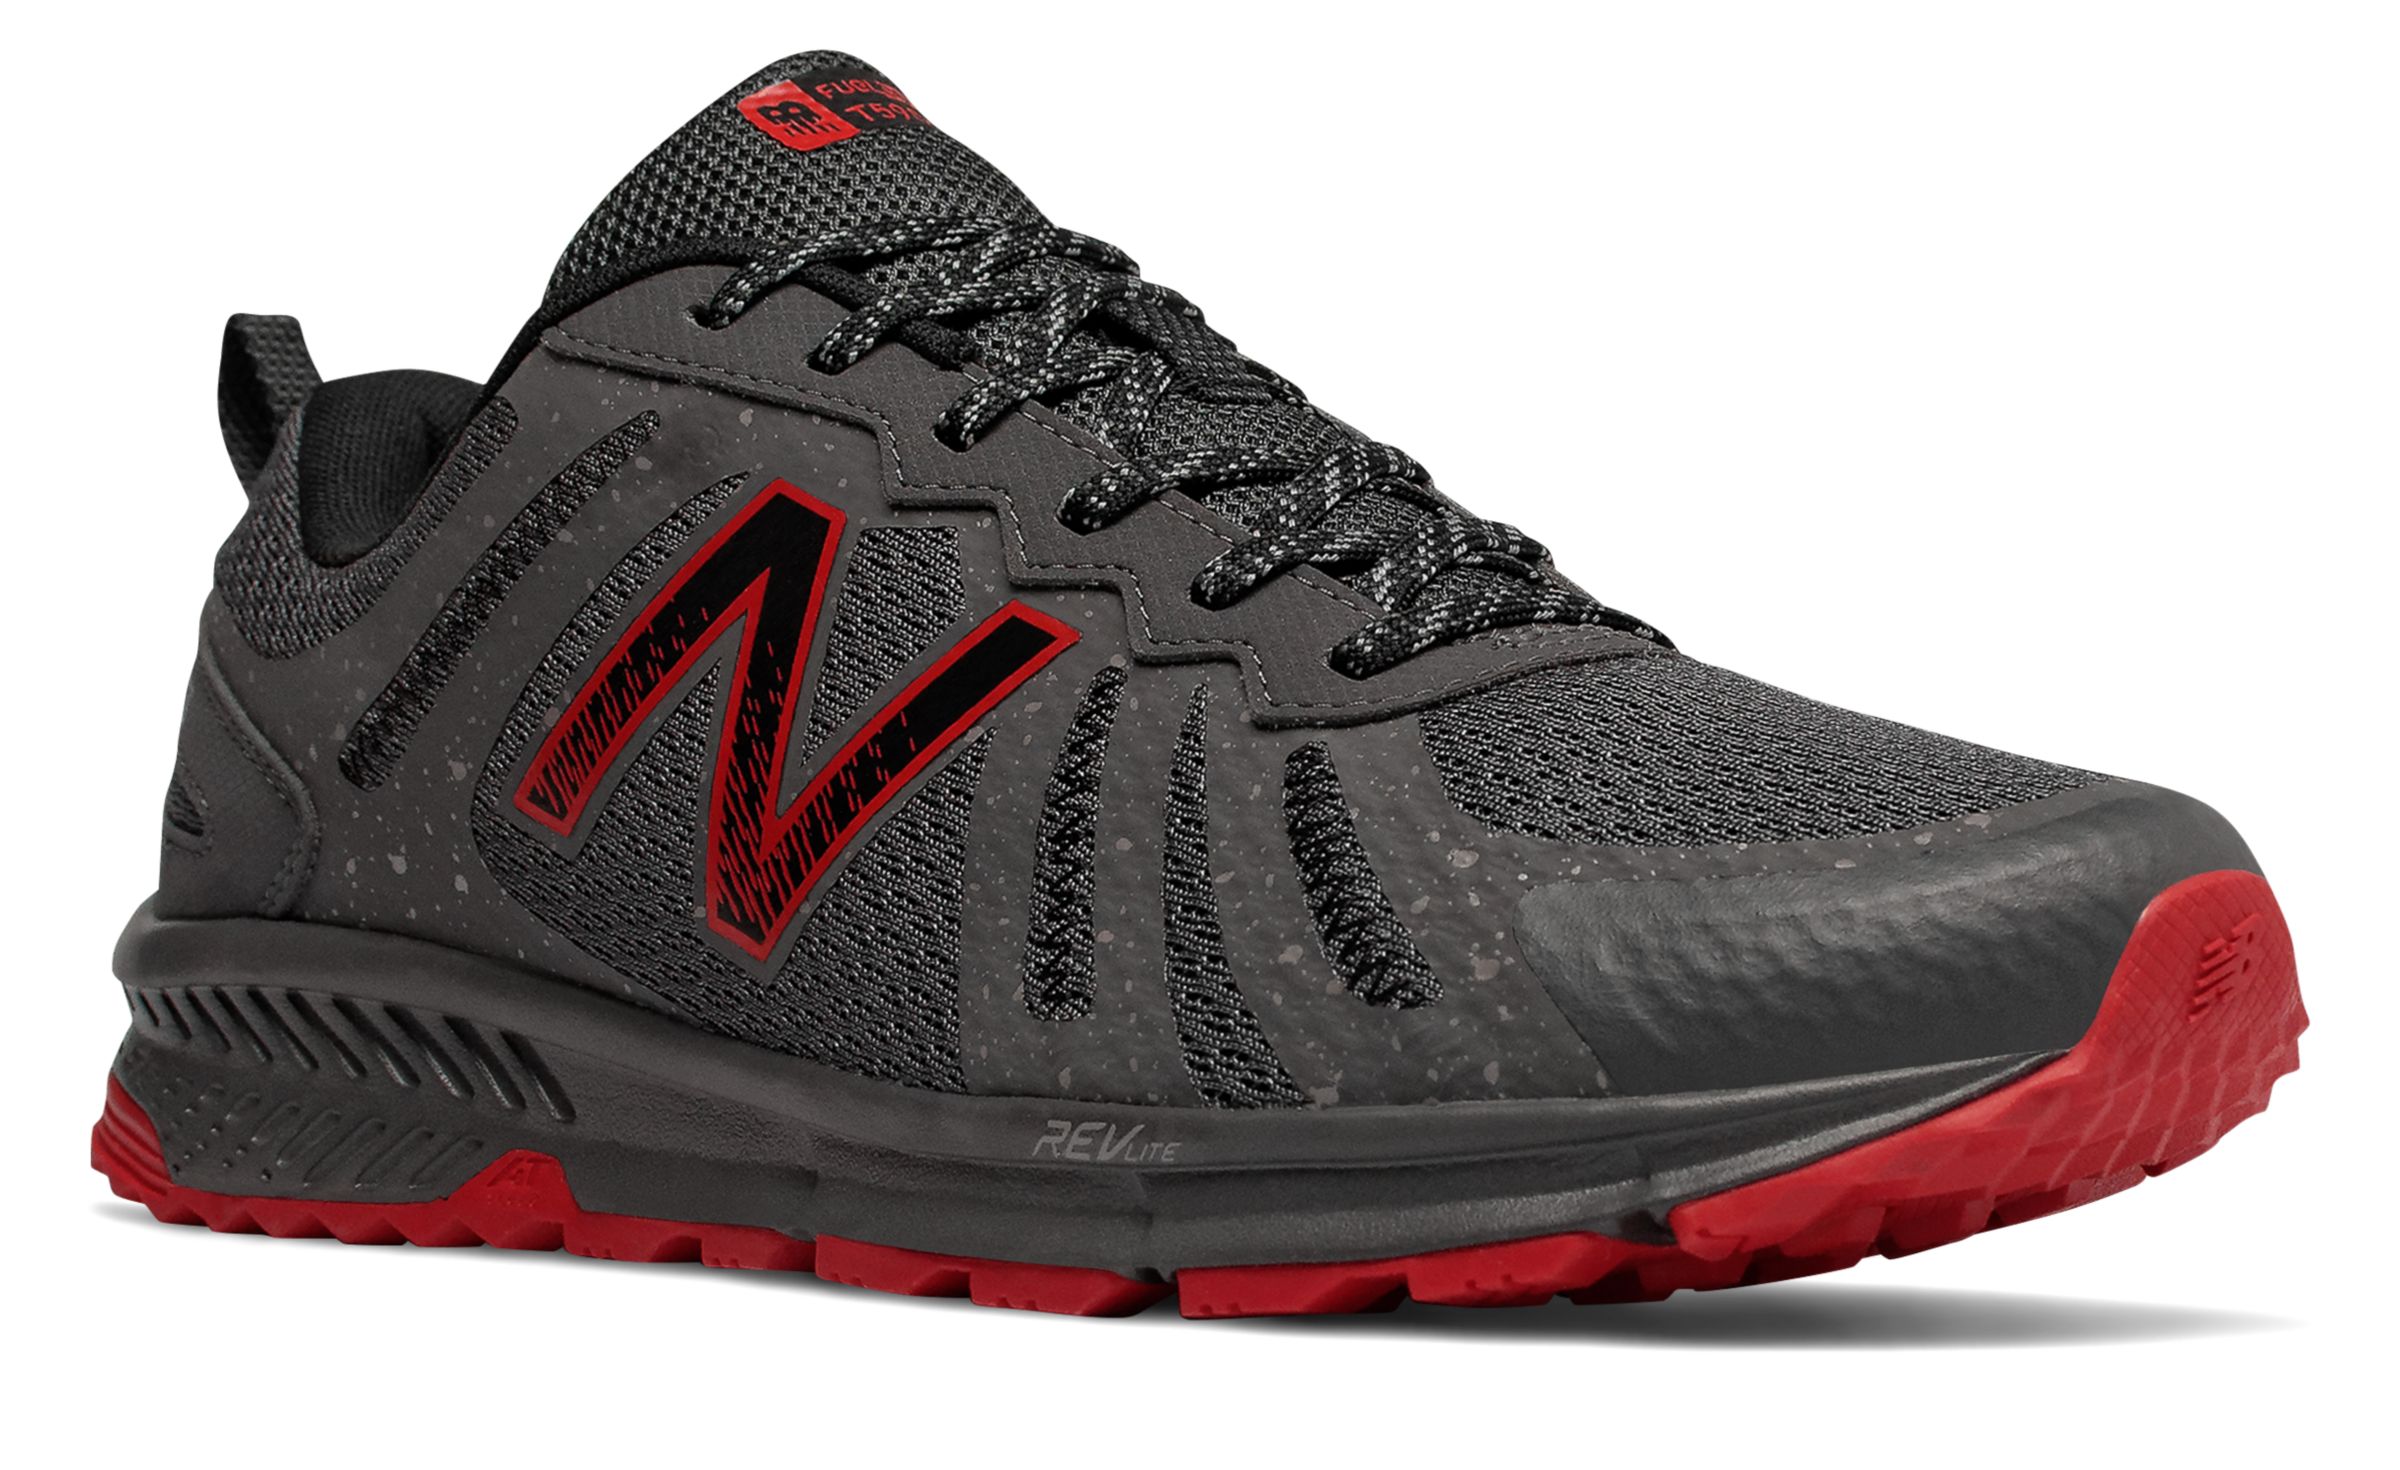 New Balance MT590-V4 on Sale - Discounts Up to 46% Off on MT590LM4 at Joe's New  Balance Outlet